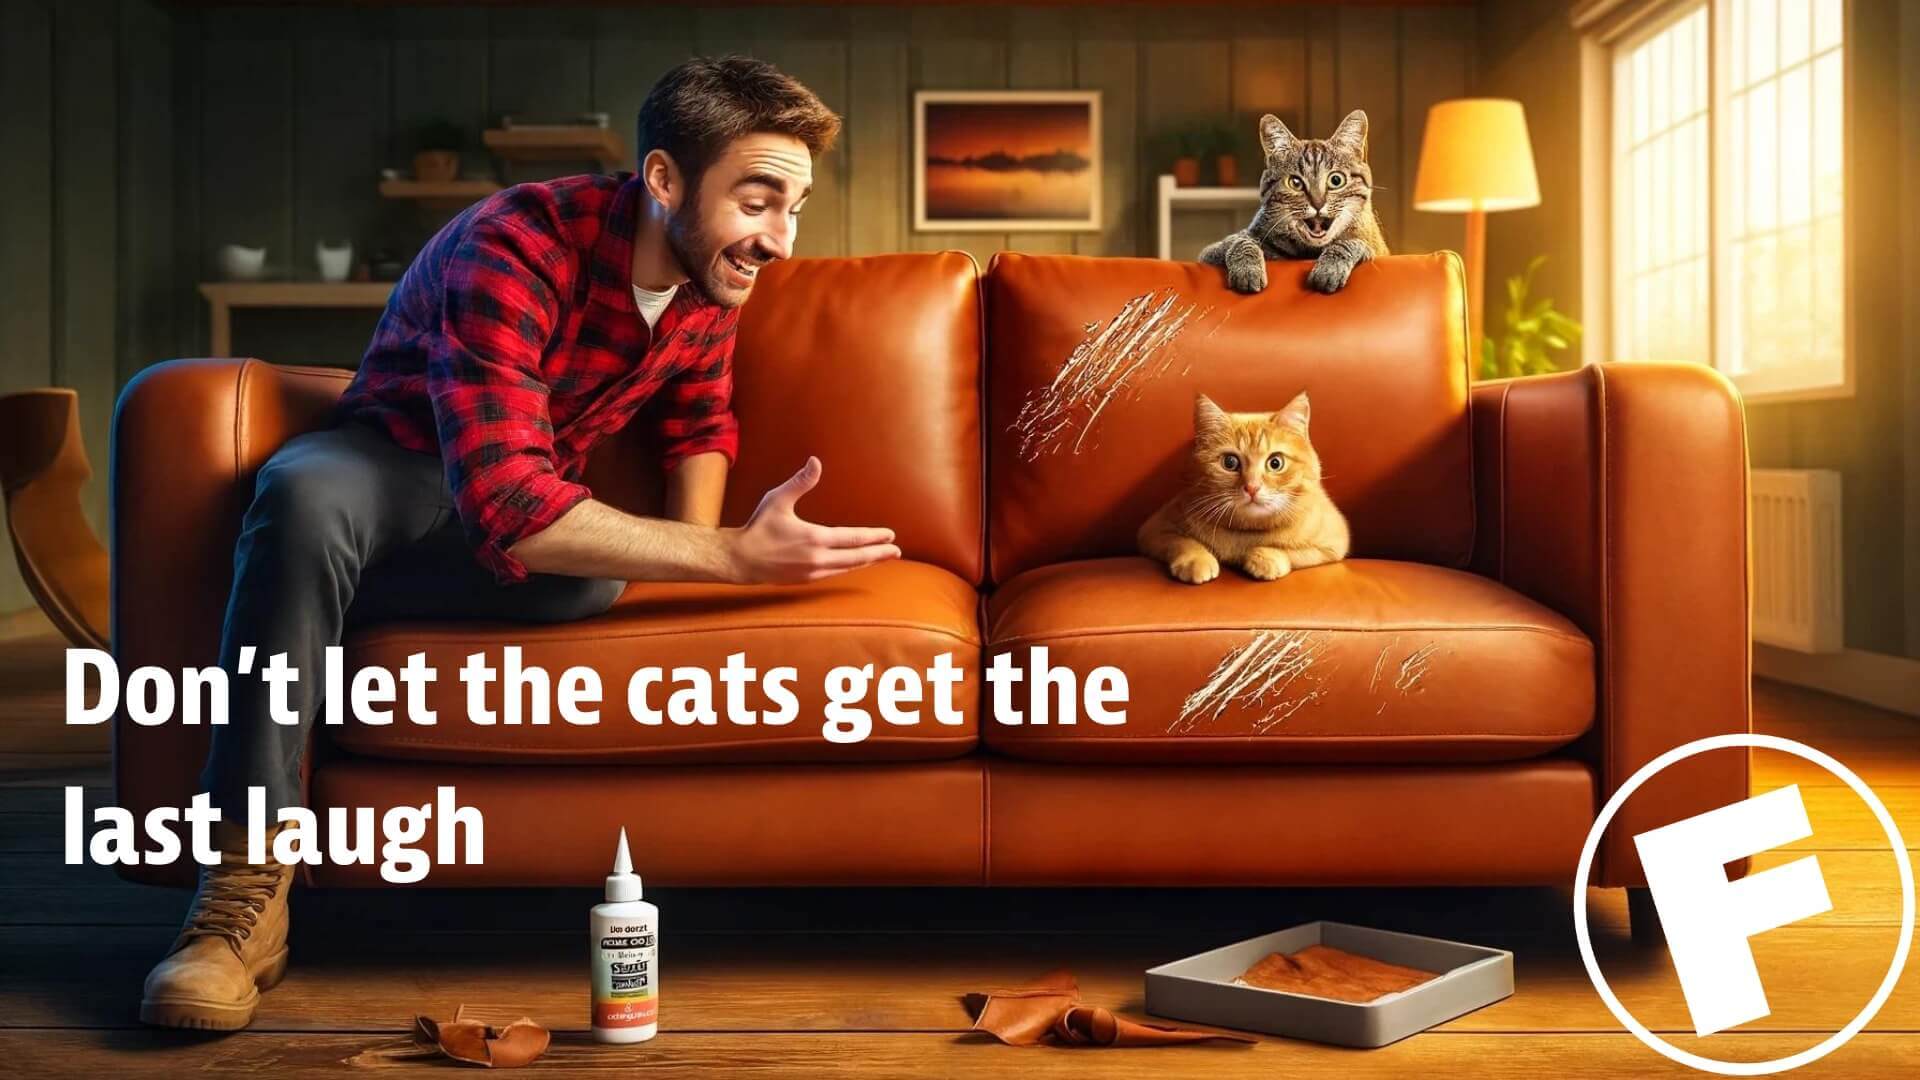 cats laugh after scratching a couch while a guys questions them in an easygoing manner